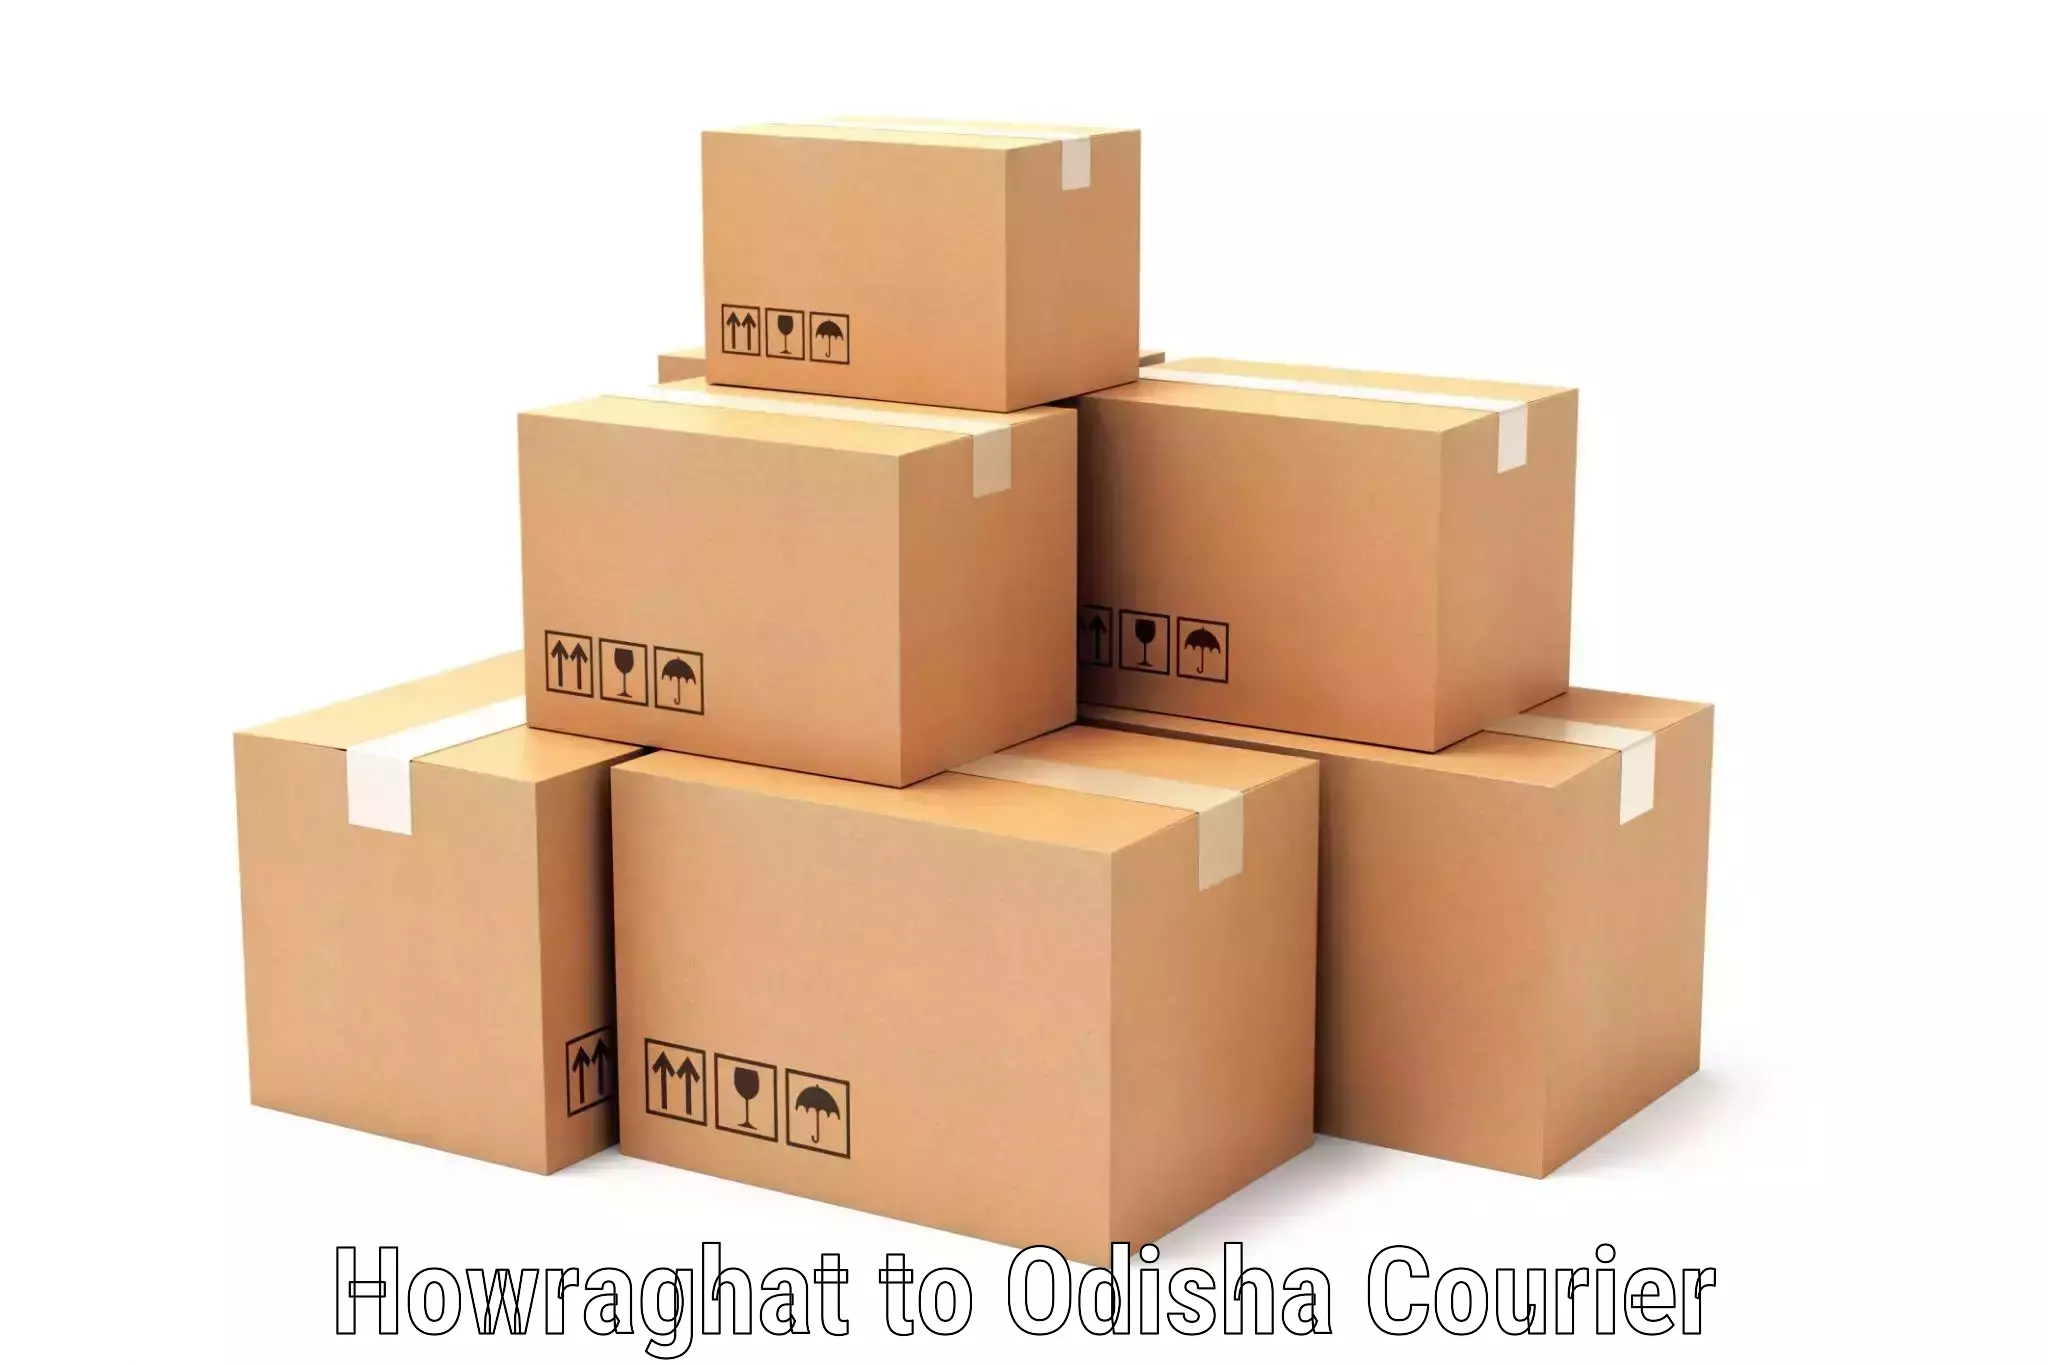 Tailored freight services Howraghat to Patkura